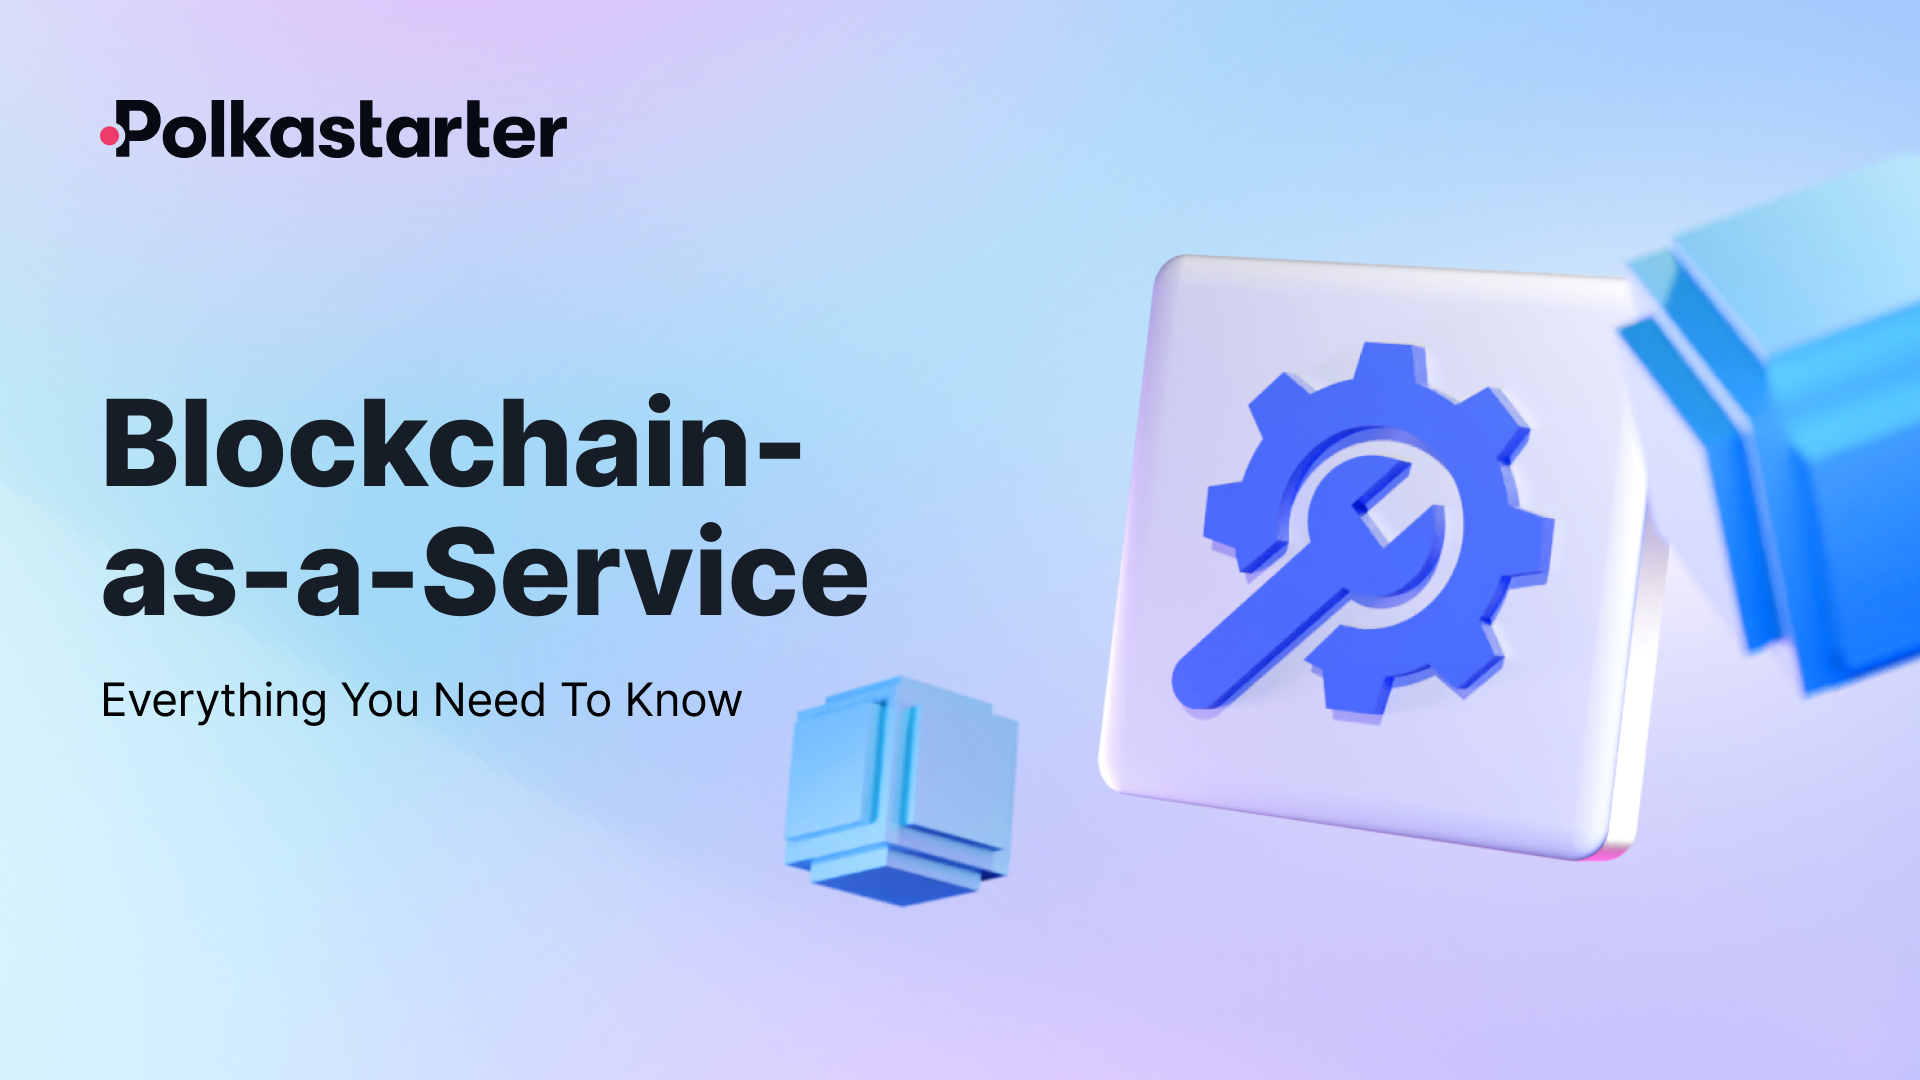 Blockchain-as-a-Service (BaaS): Everything You Need To Know